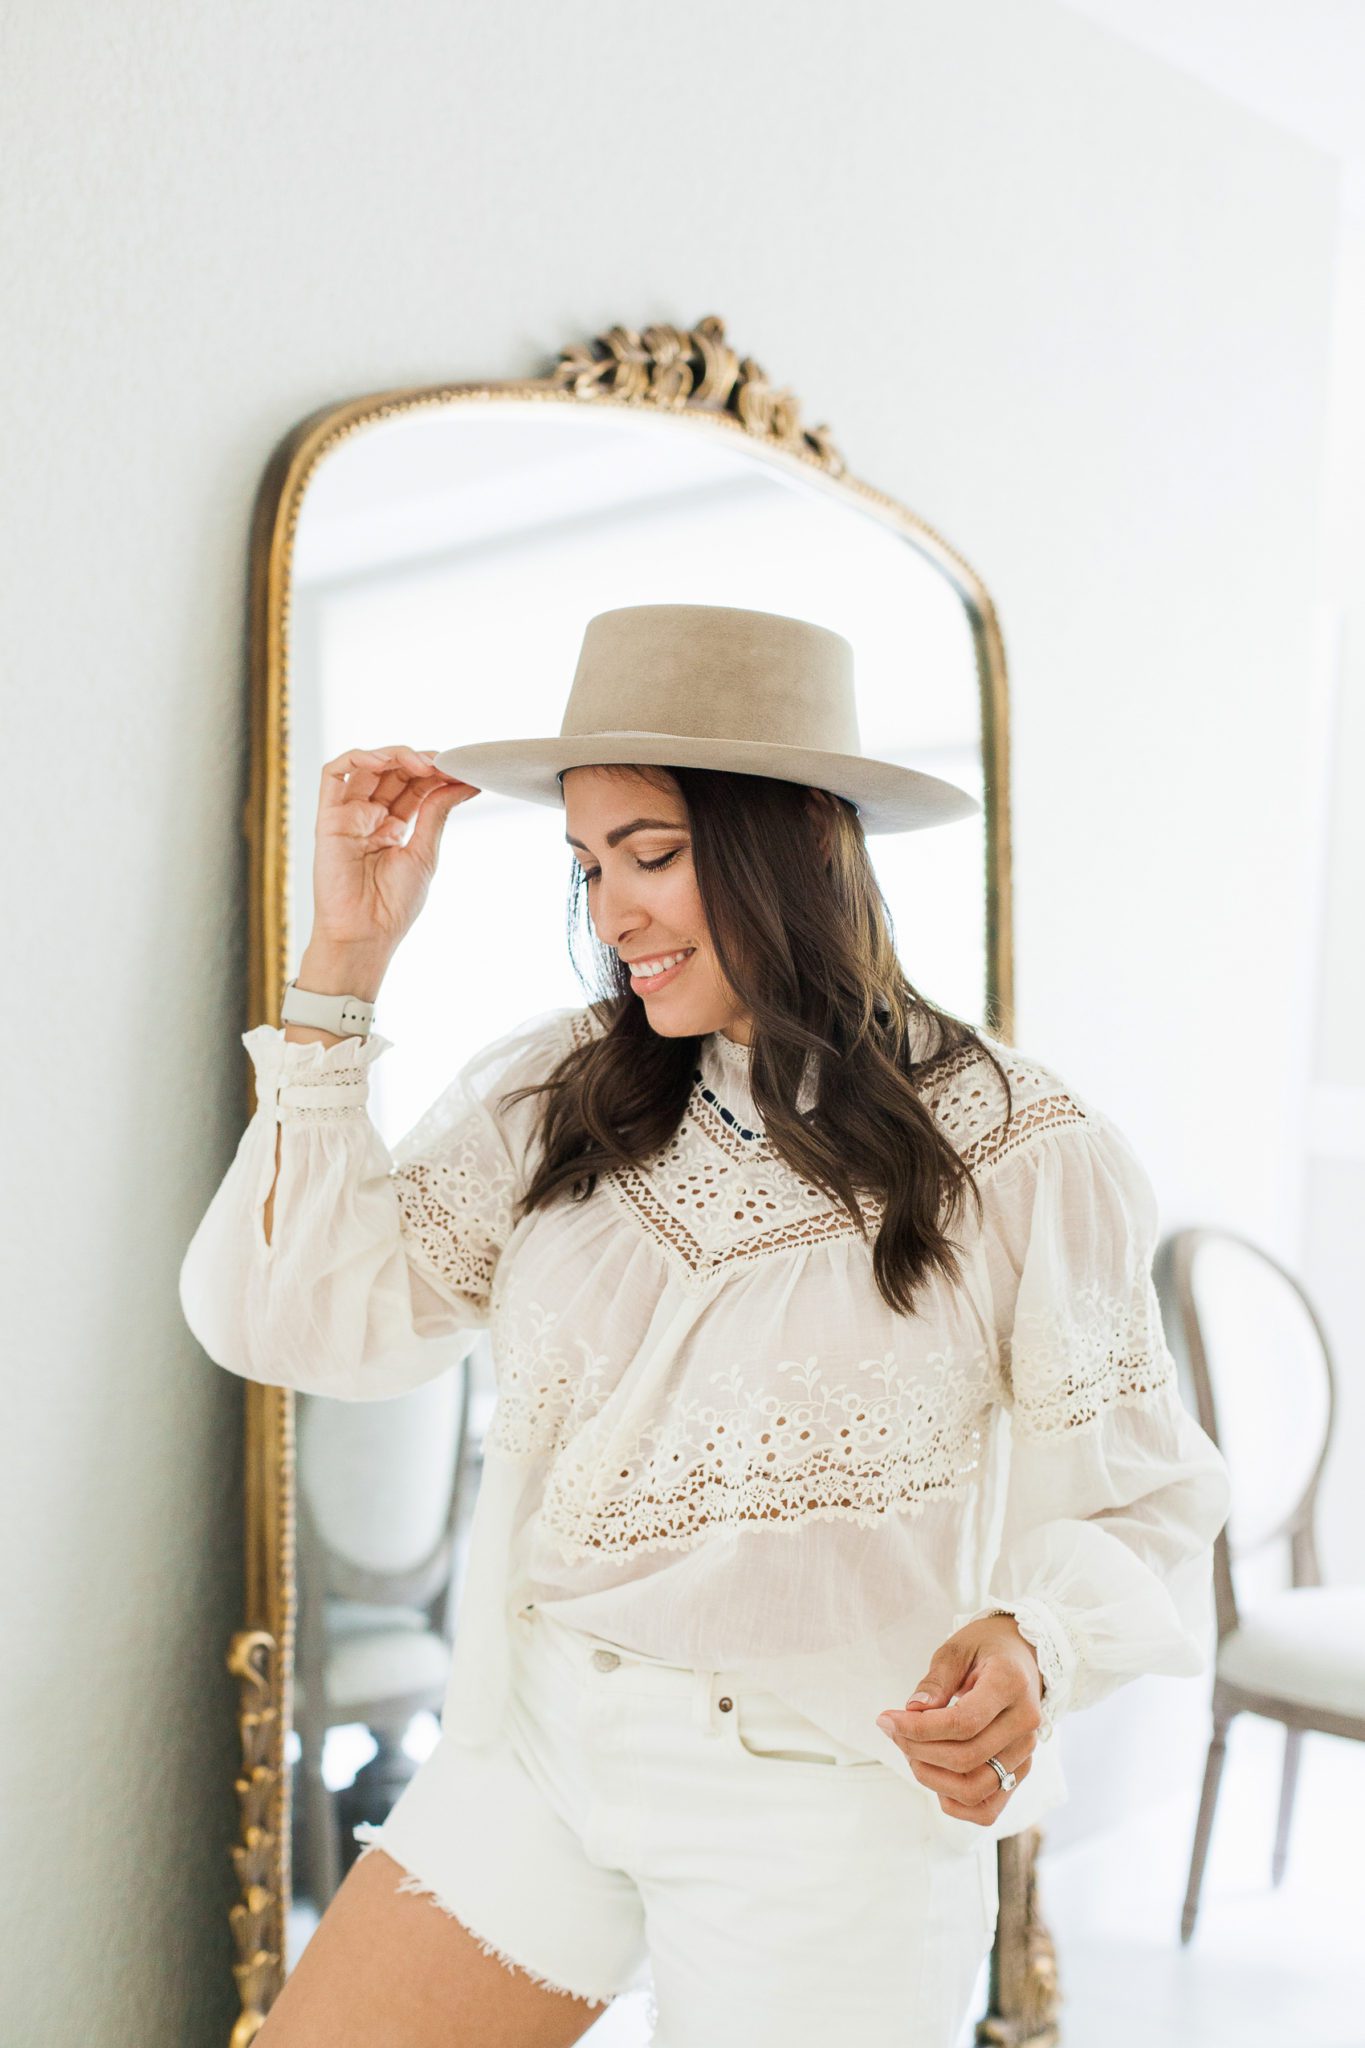 Sing Hat Company customized hat review featured by top FL fashion blogger, A Glam Lifestyle